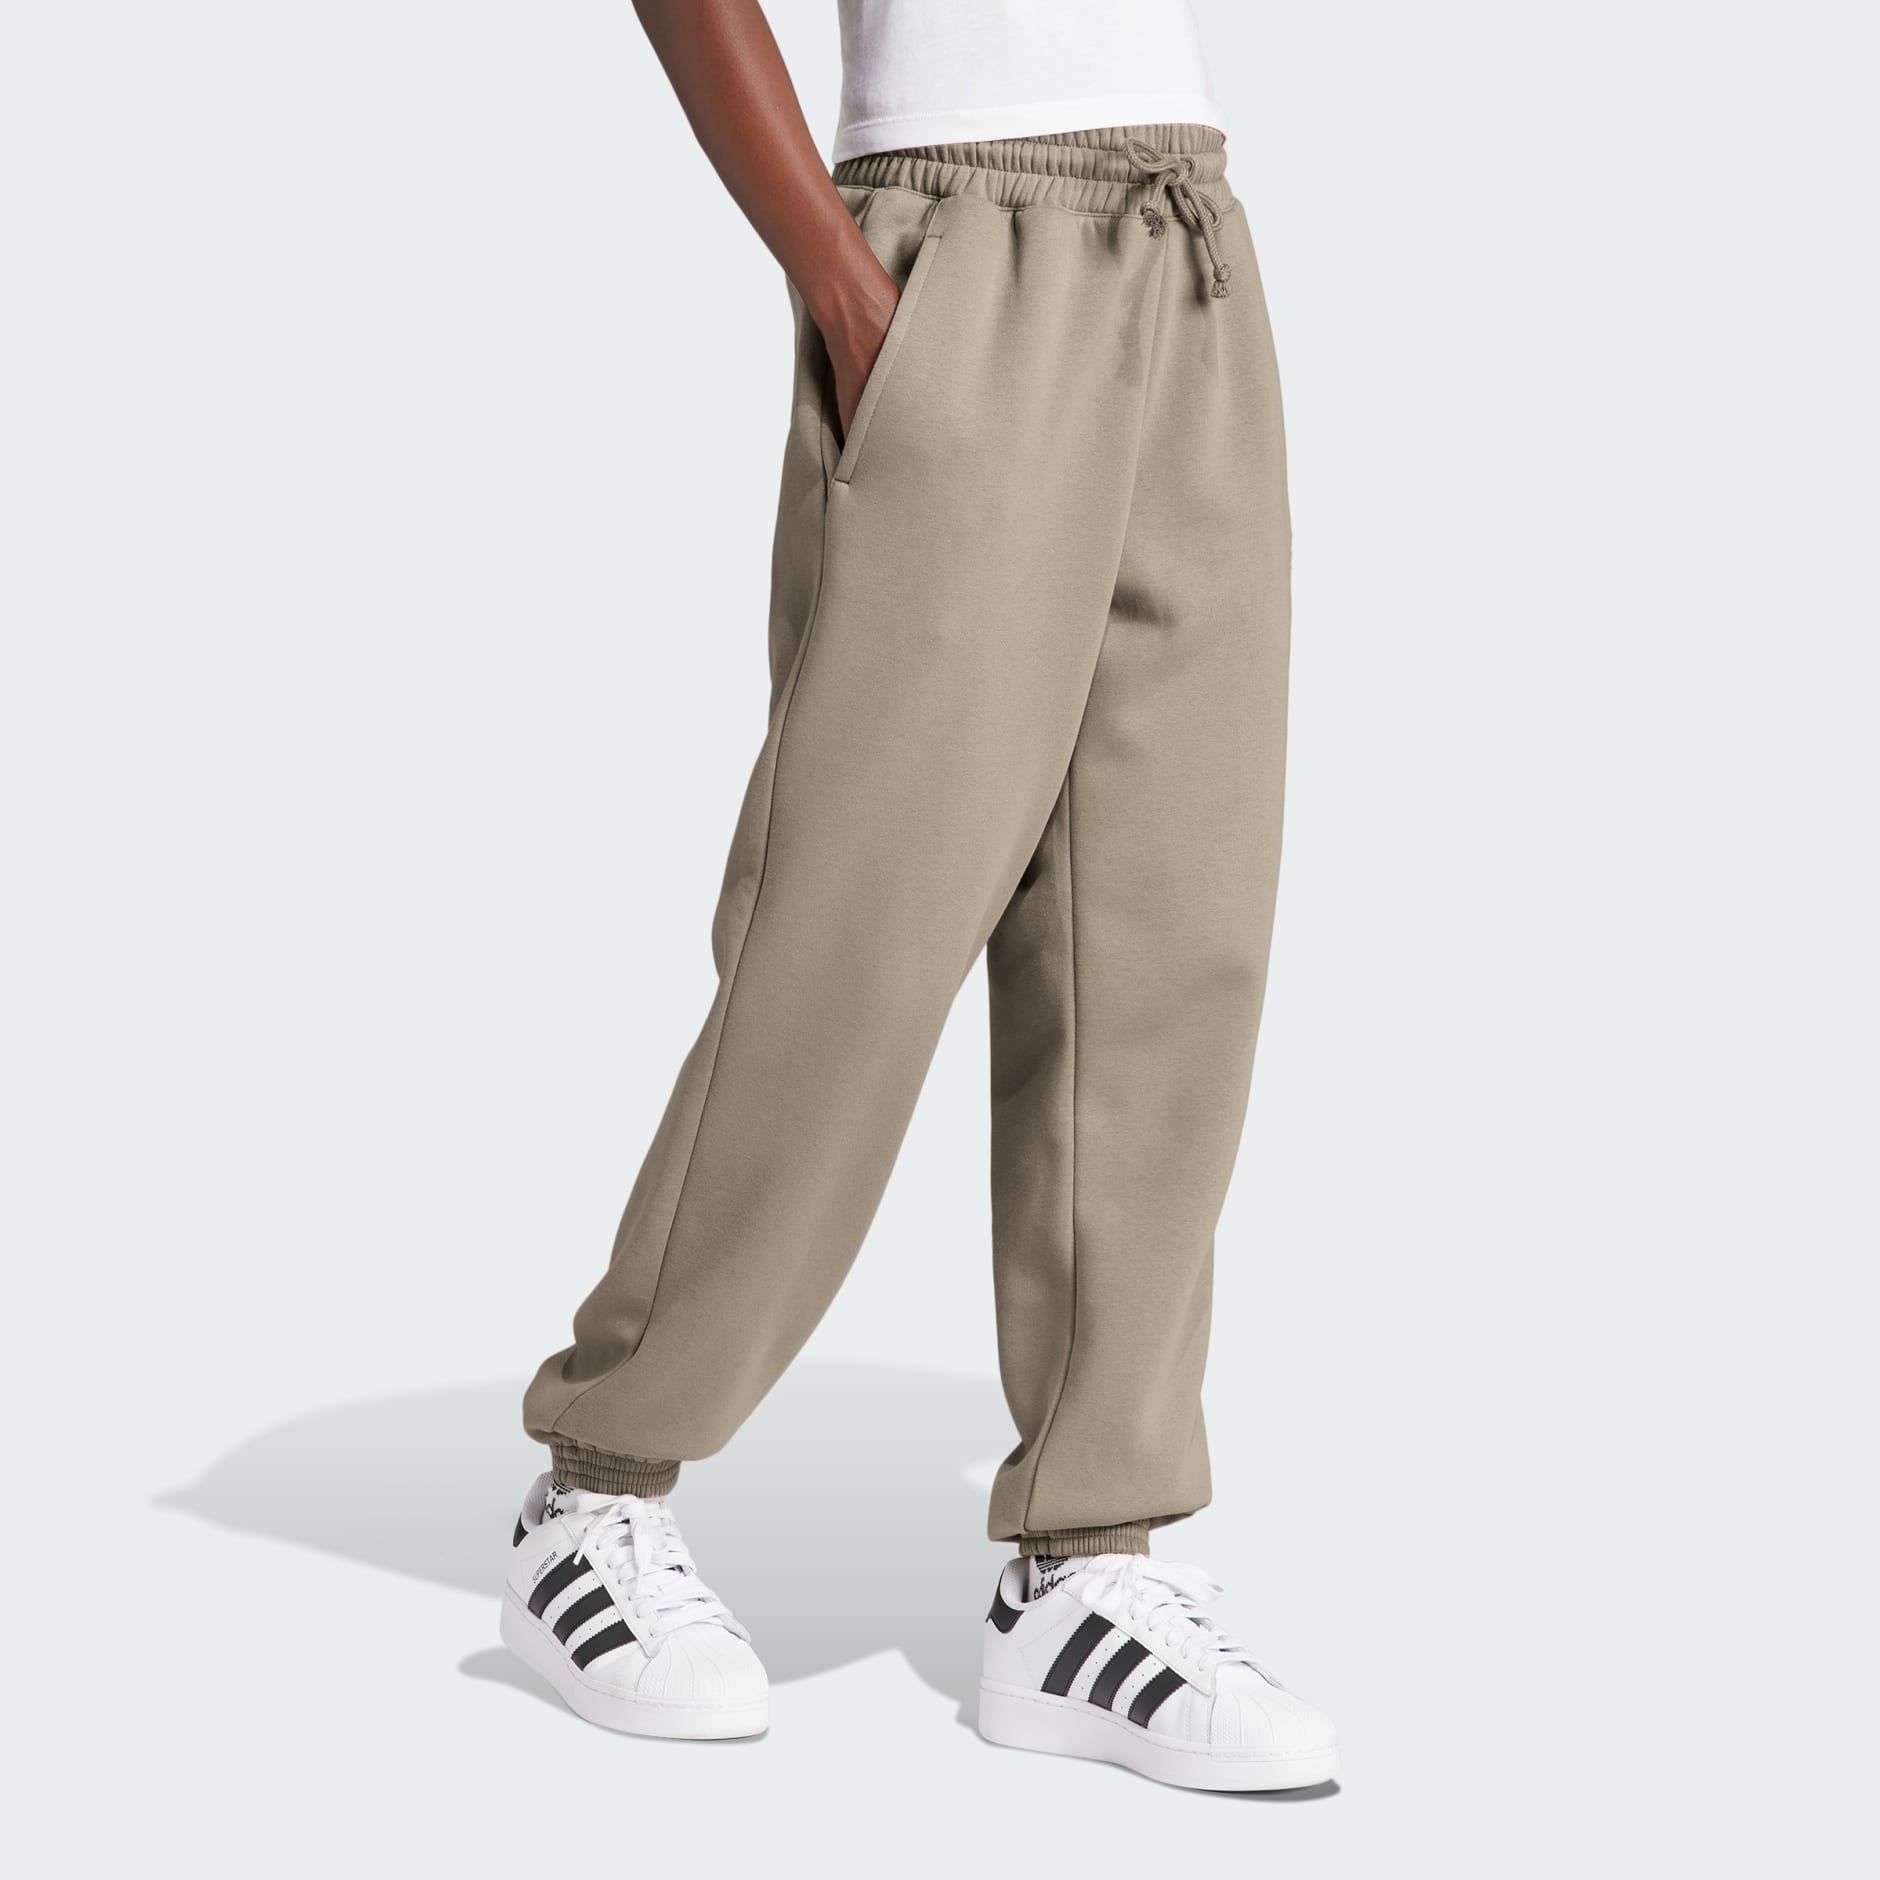 Women's Clothing - Holiday Sweat Pants (Gender Neutral) - Brown